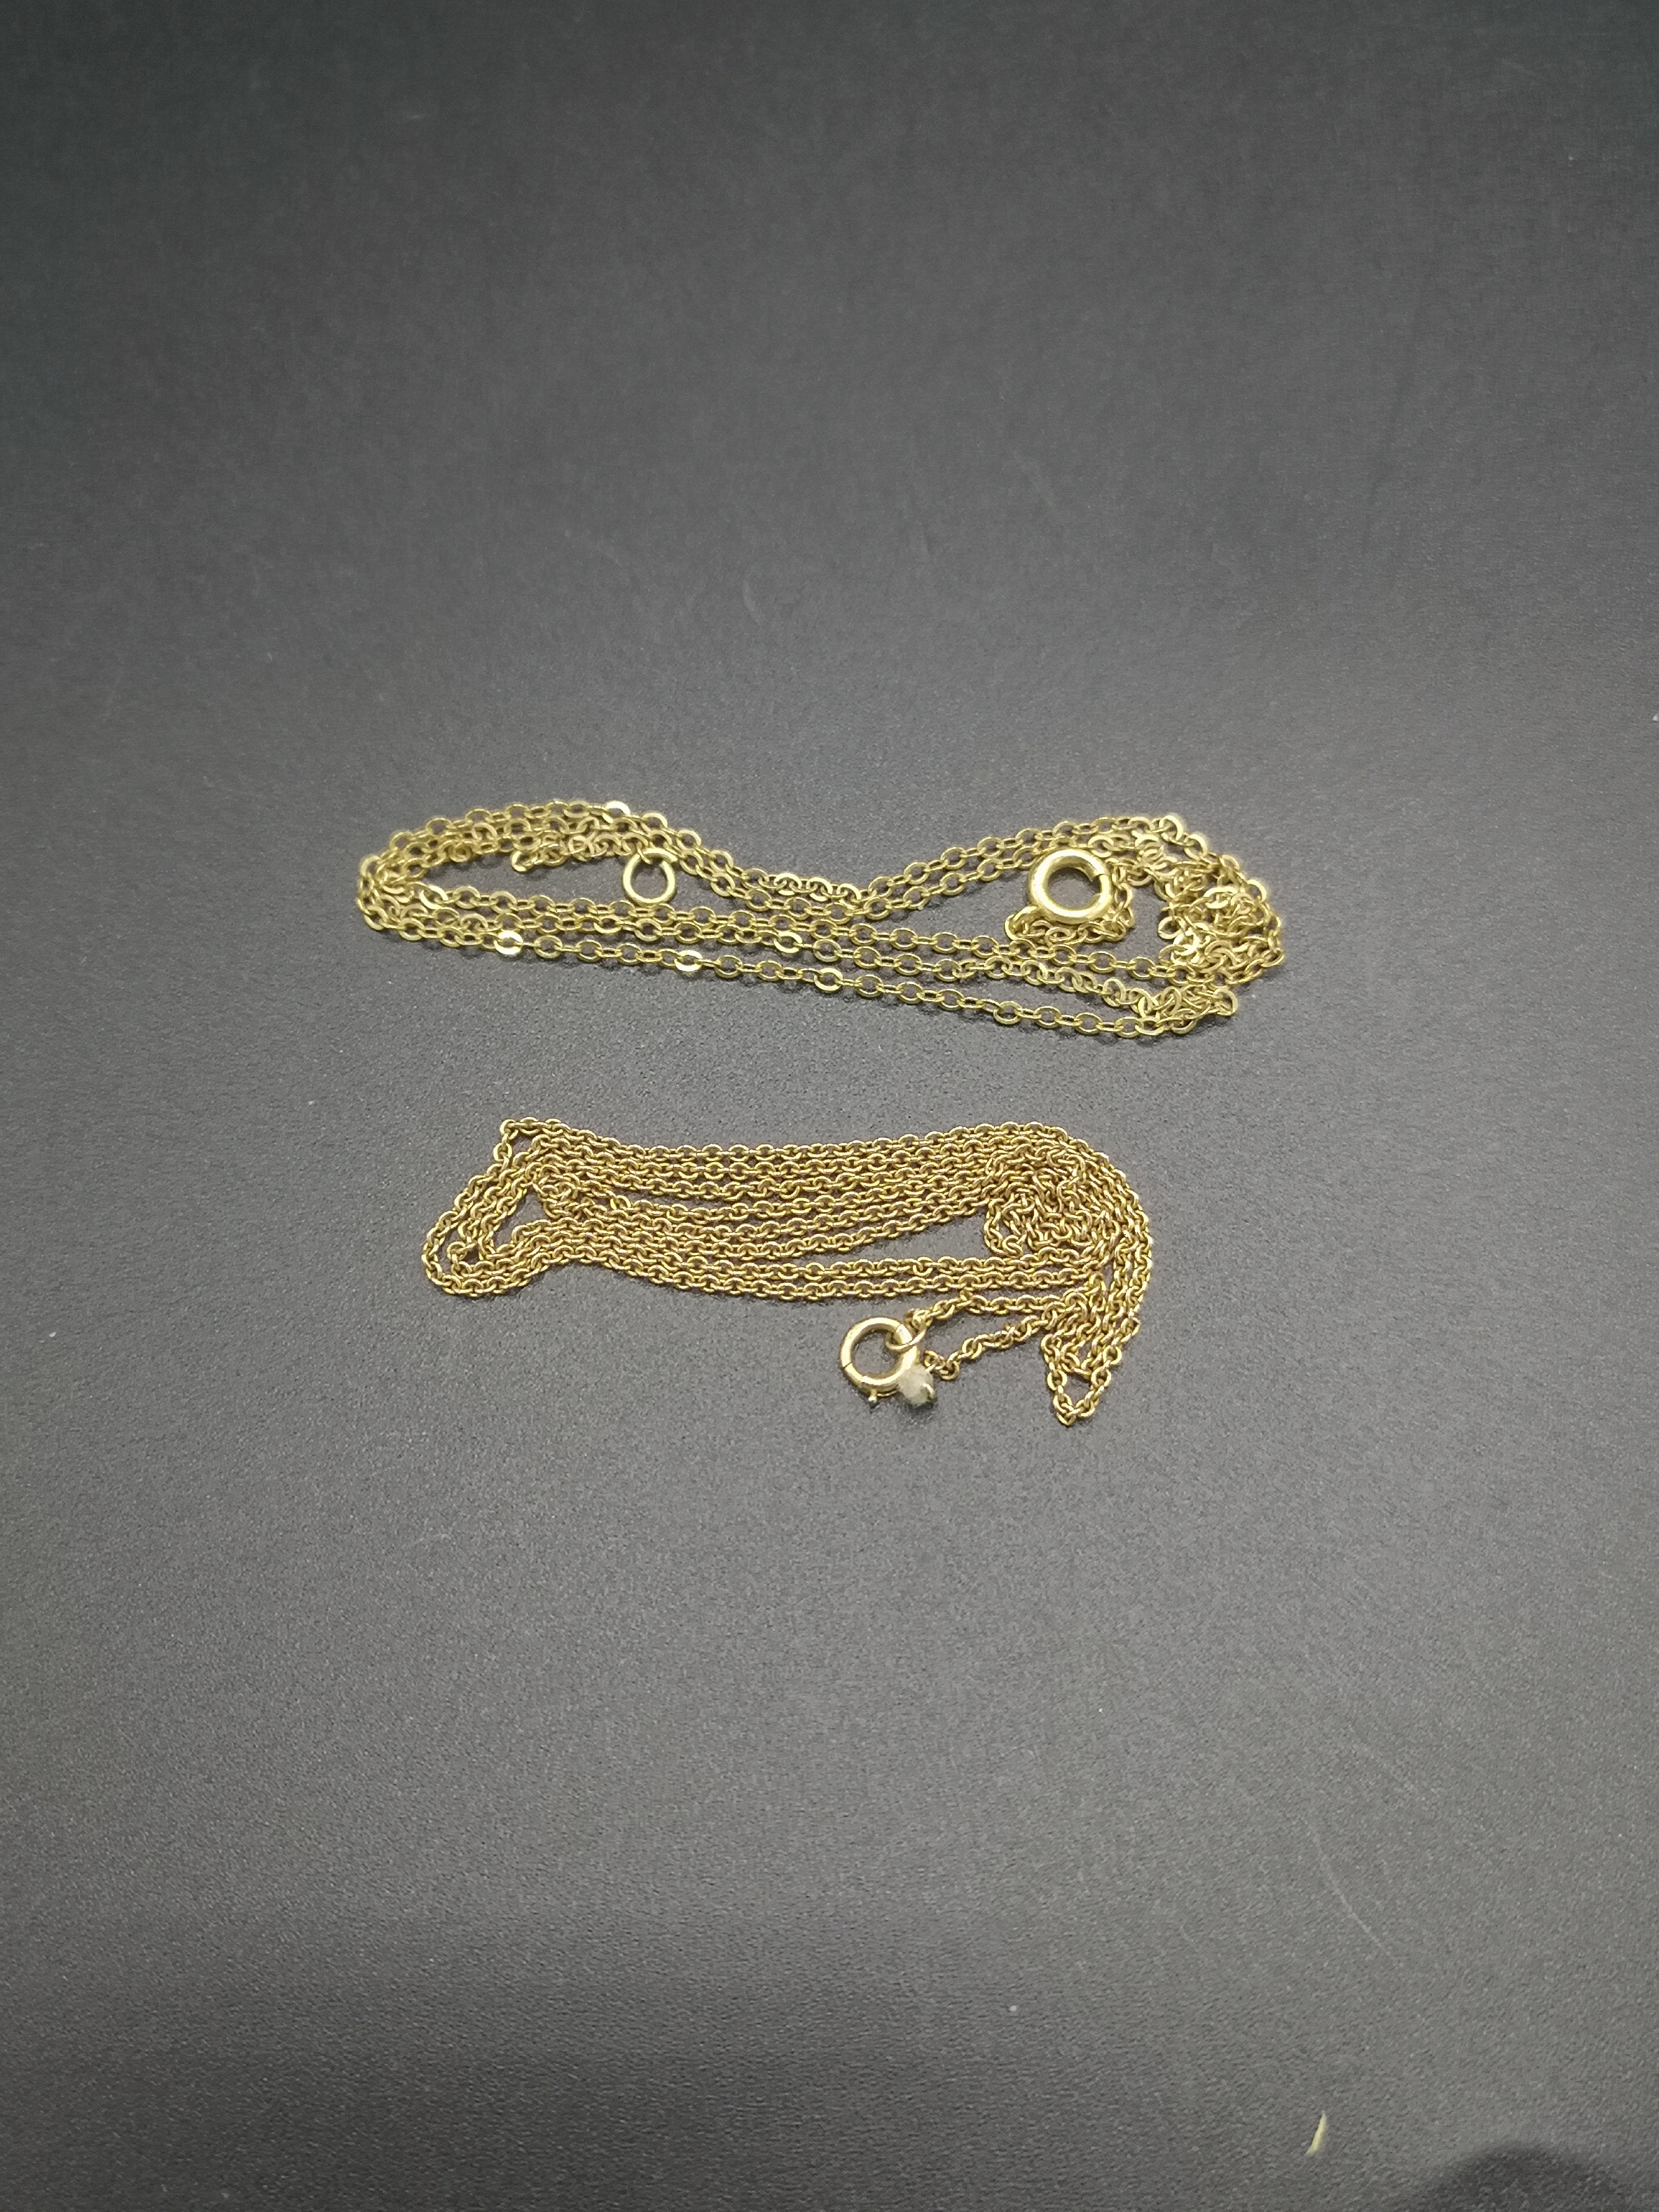 Two 9ct gold necklaces - Image 2 of 3